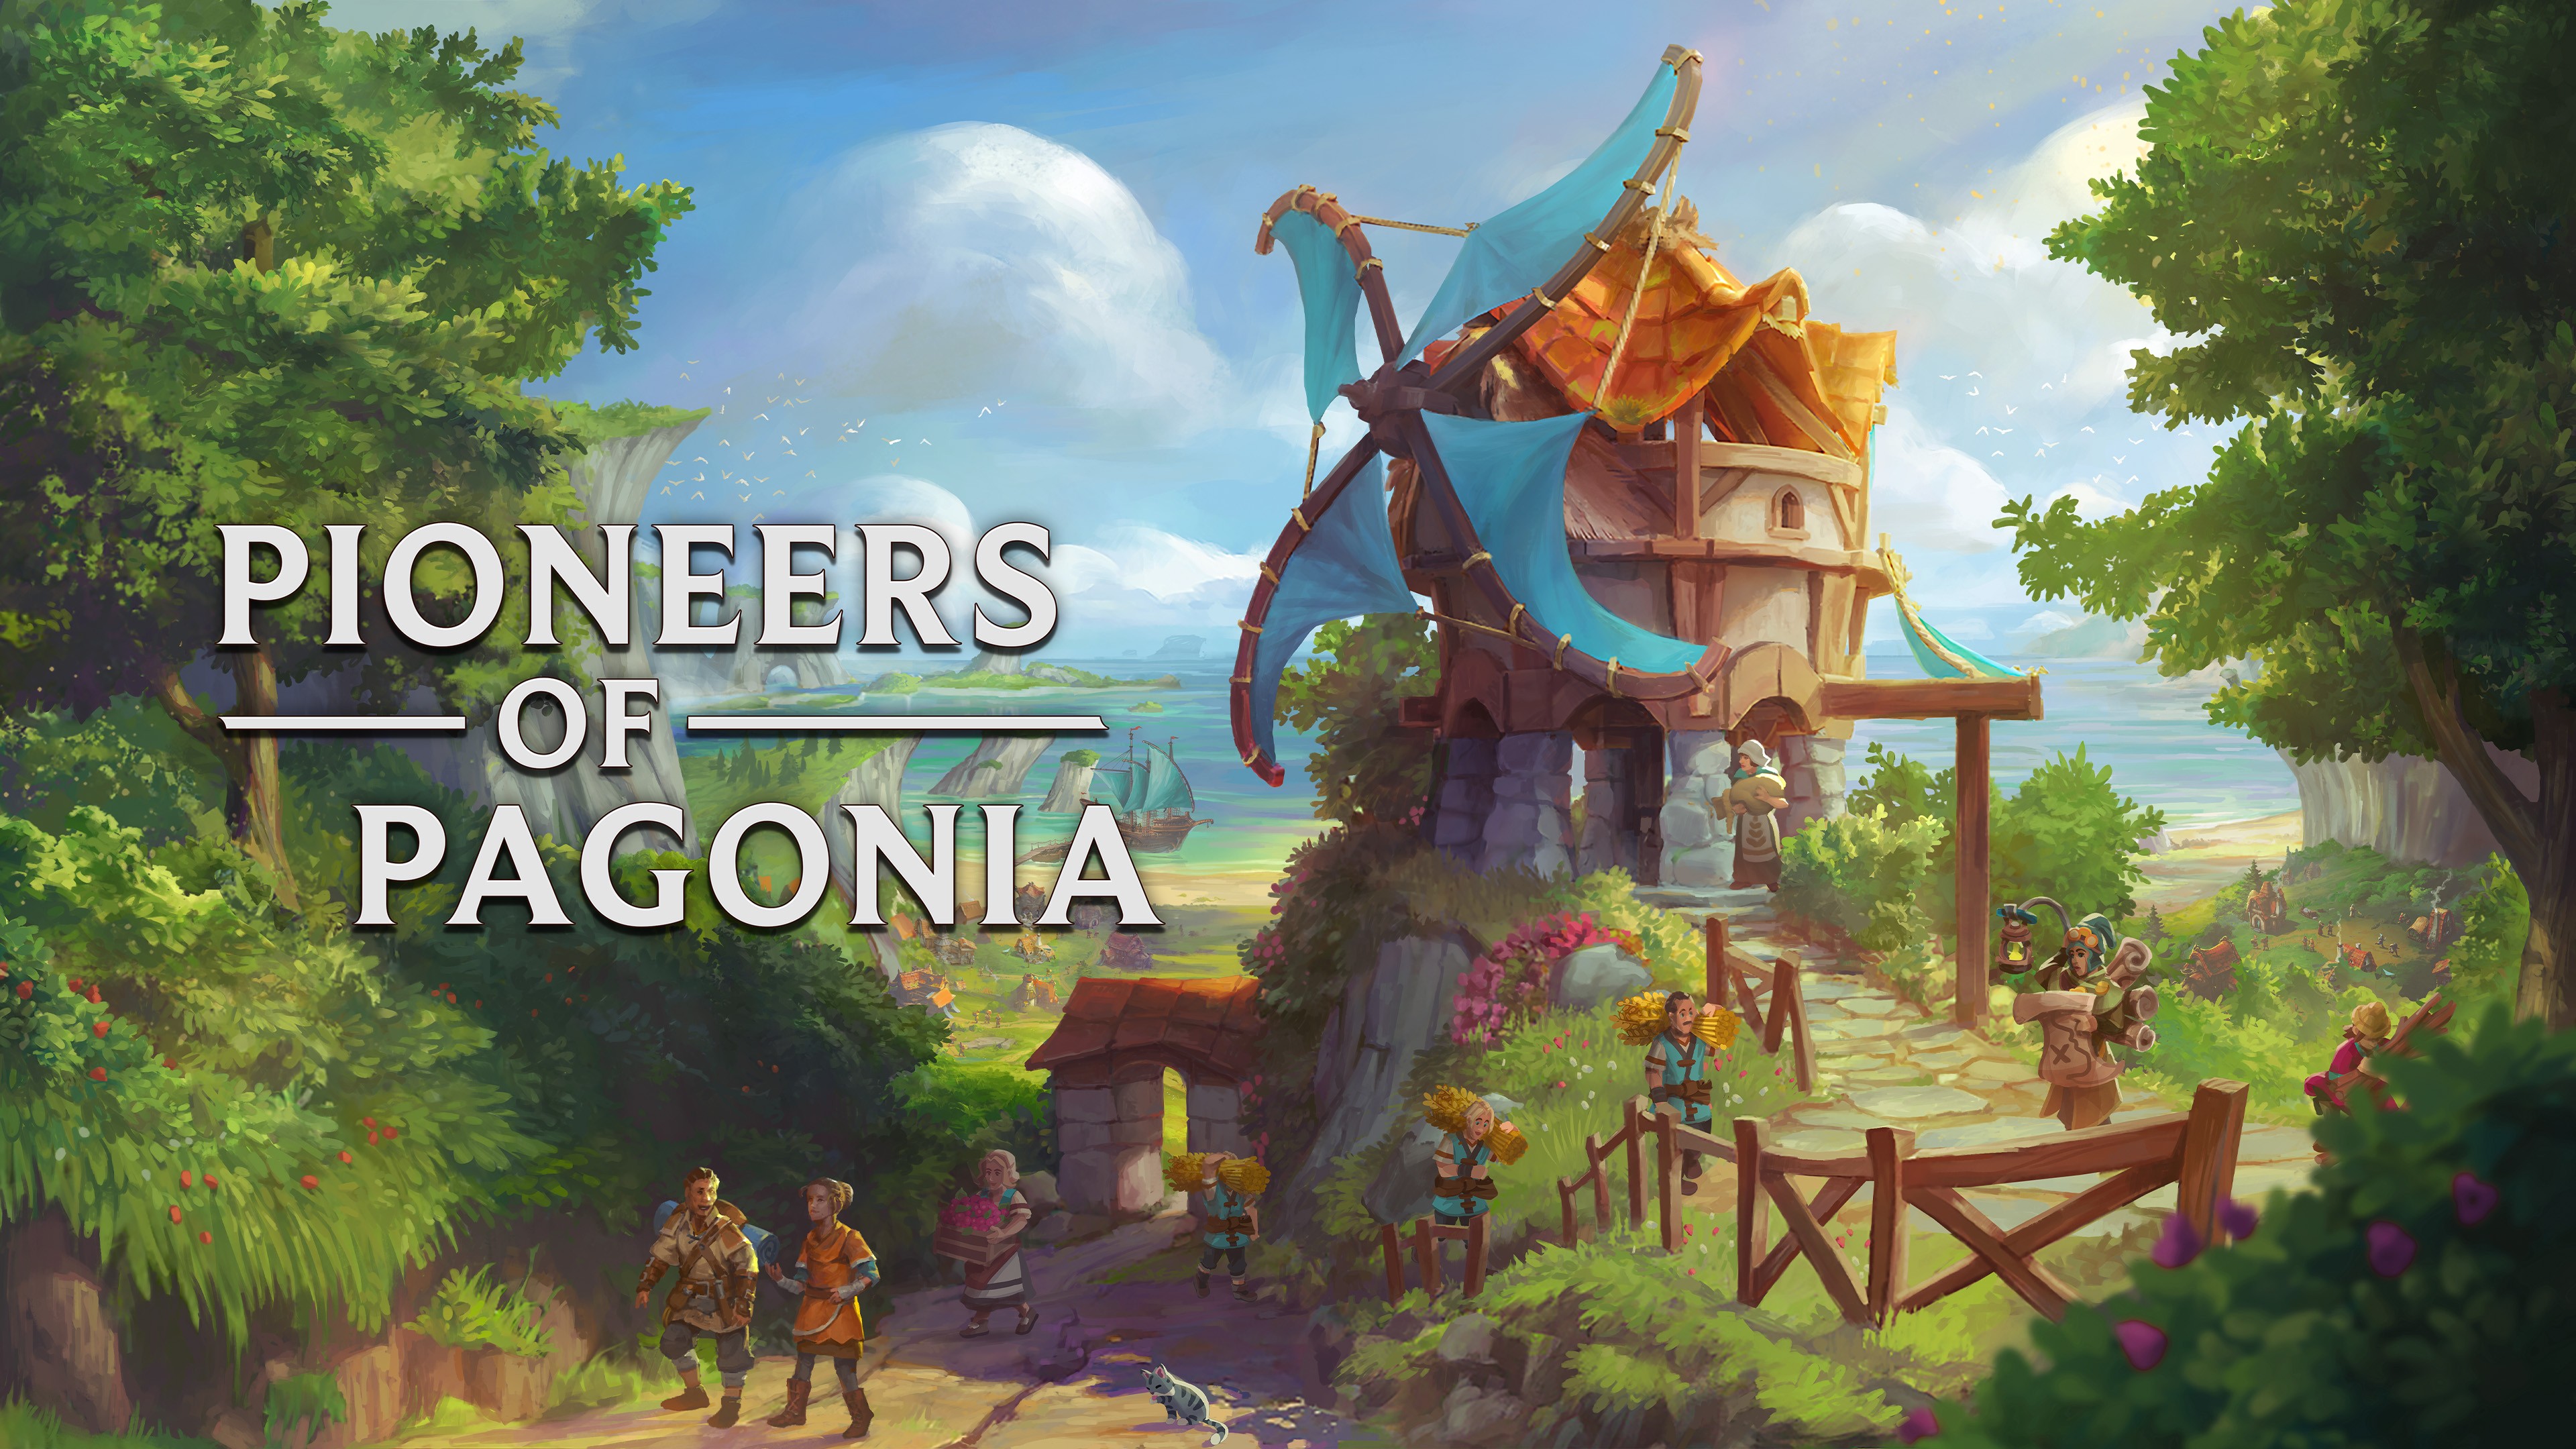 Pioneers of Pagonia. Pioneers of Pagonia PC. Scattered Tribes.